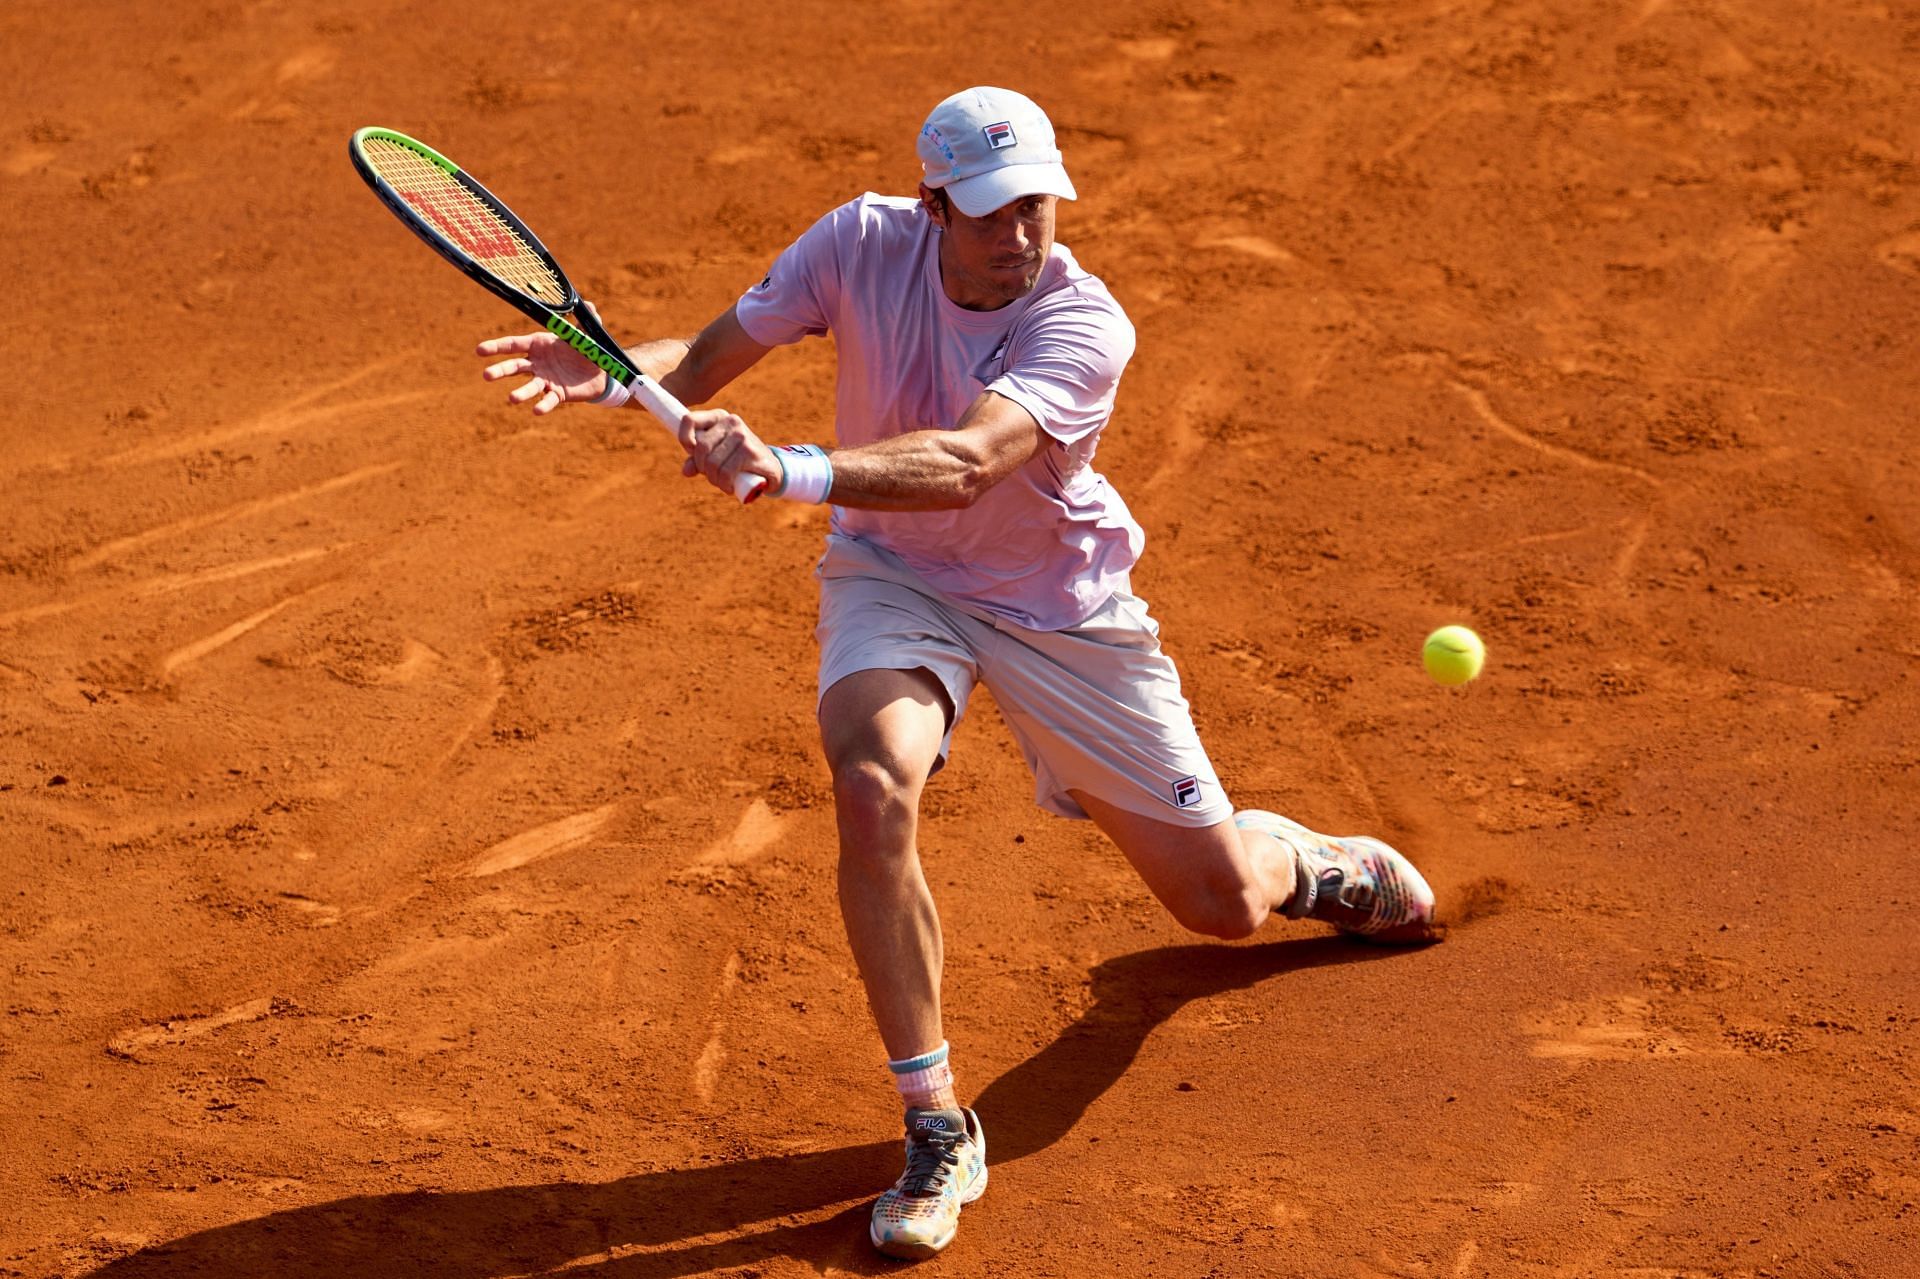 Guido Pella in action at the Barcelona Open Banc Sabadell in 2021.